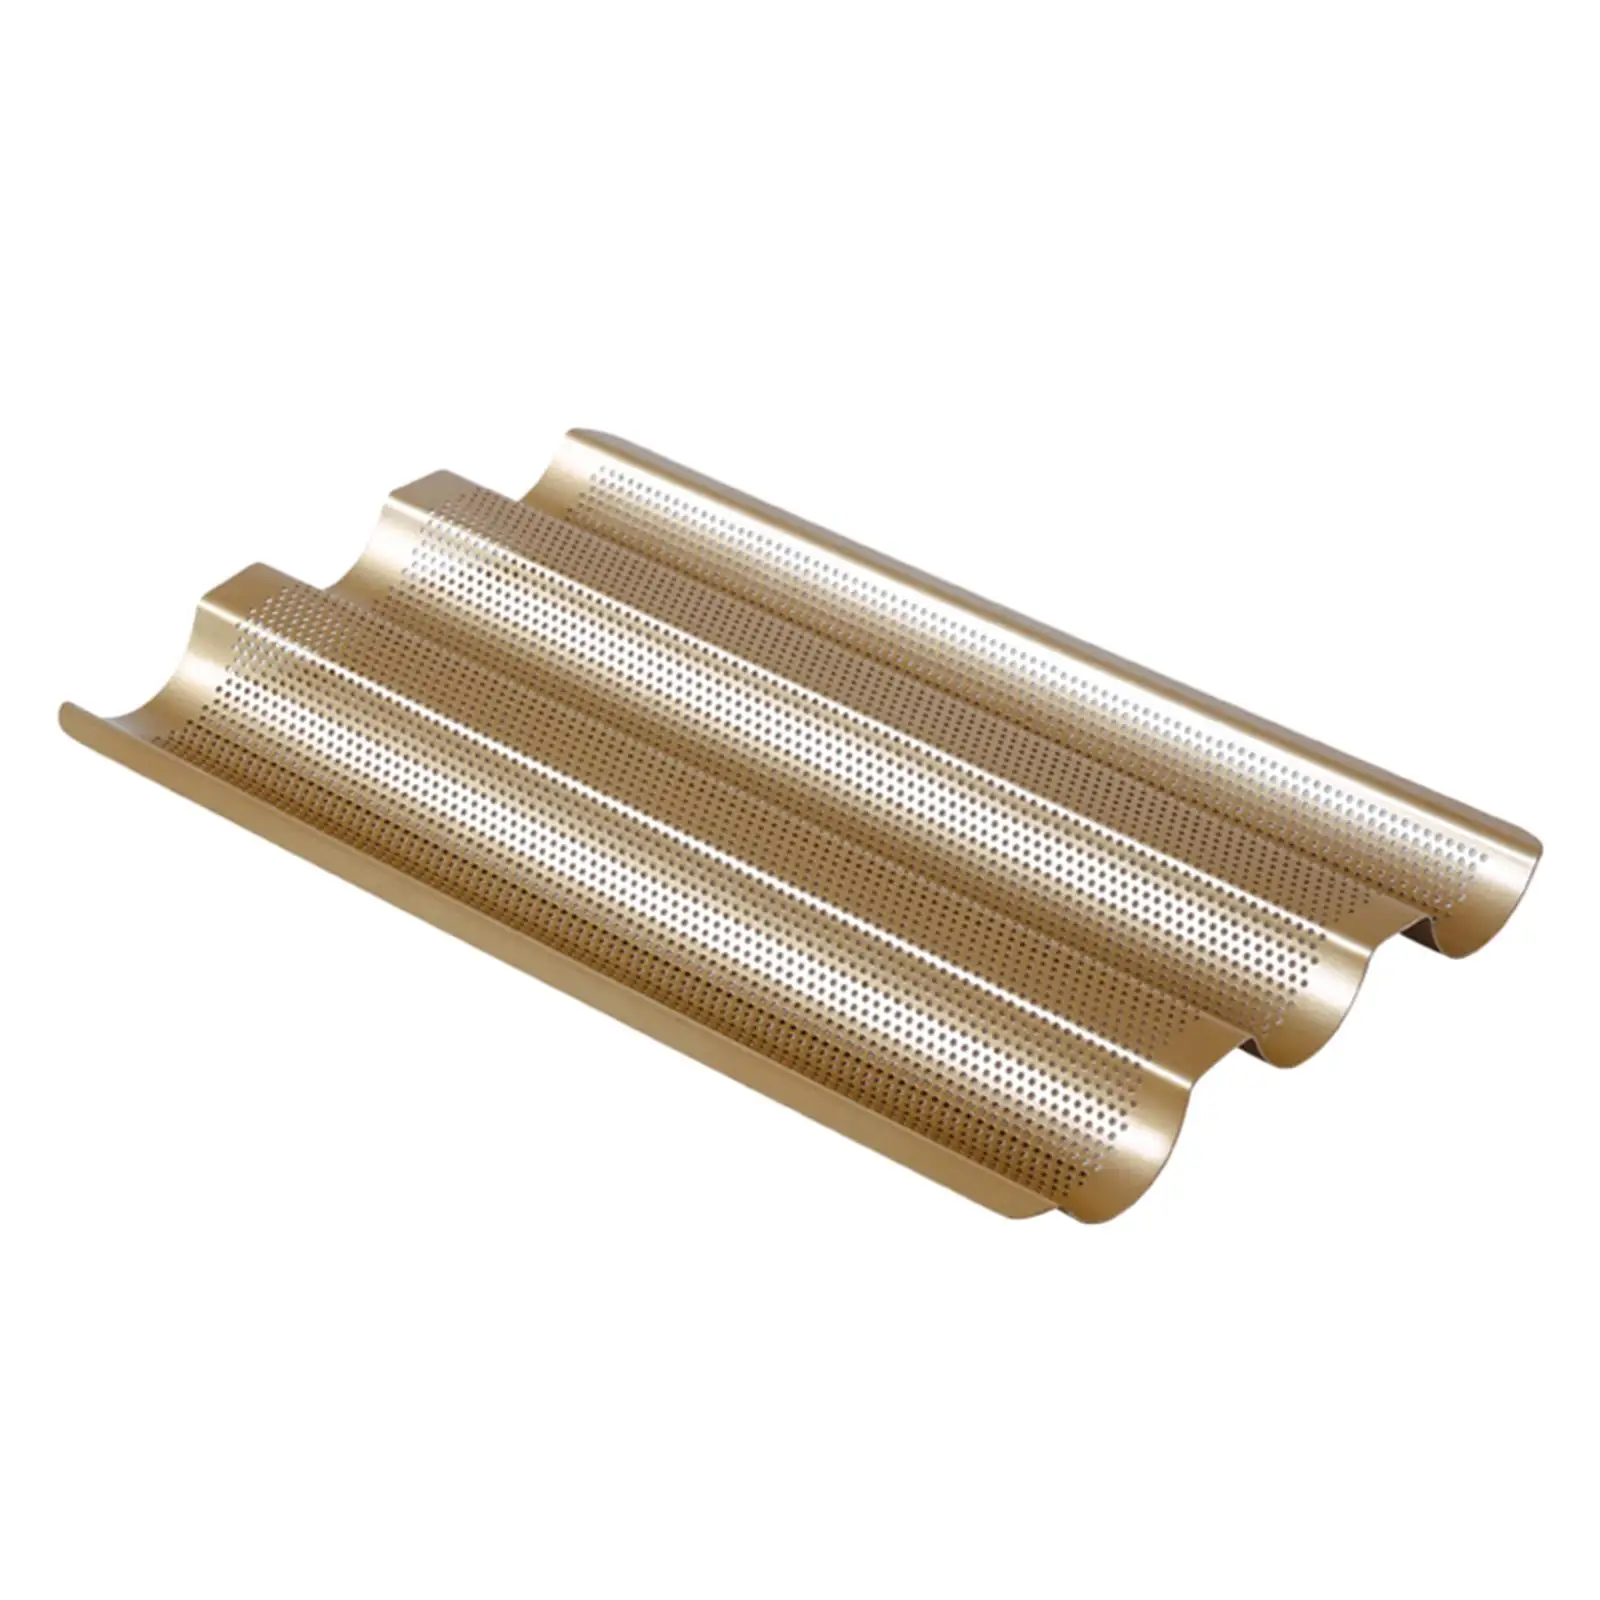 Baguettes Baking Tray for Bakery Baking Loaf Bread Accessories